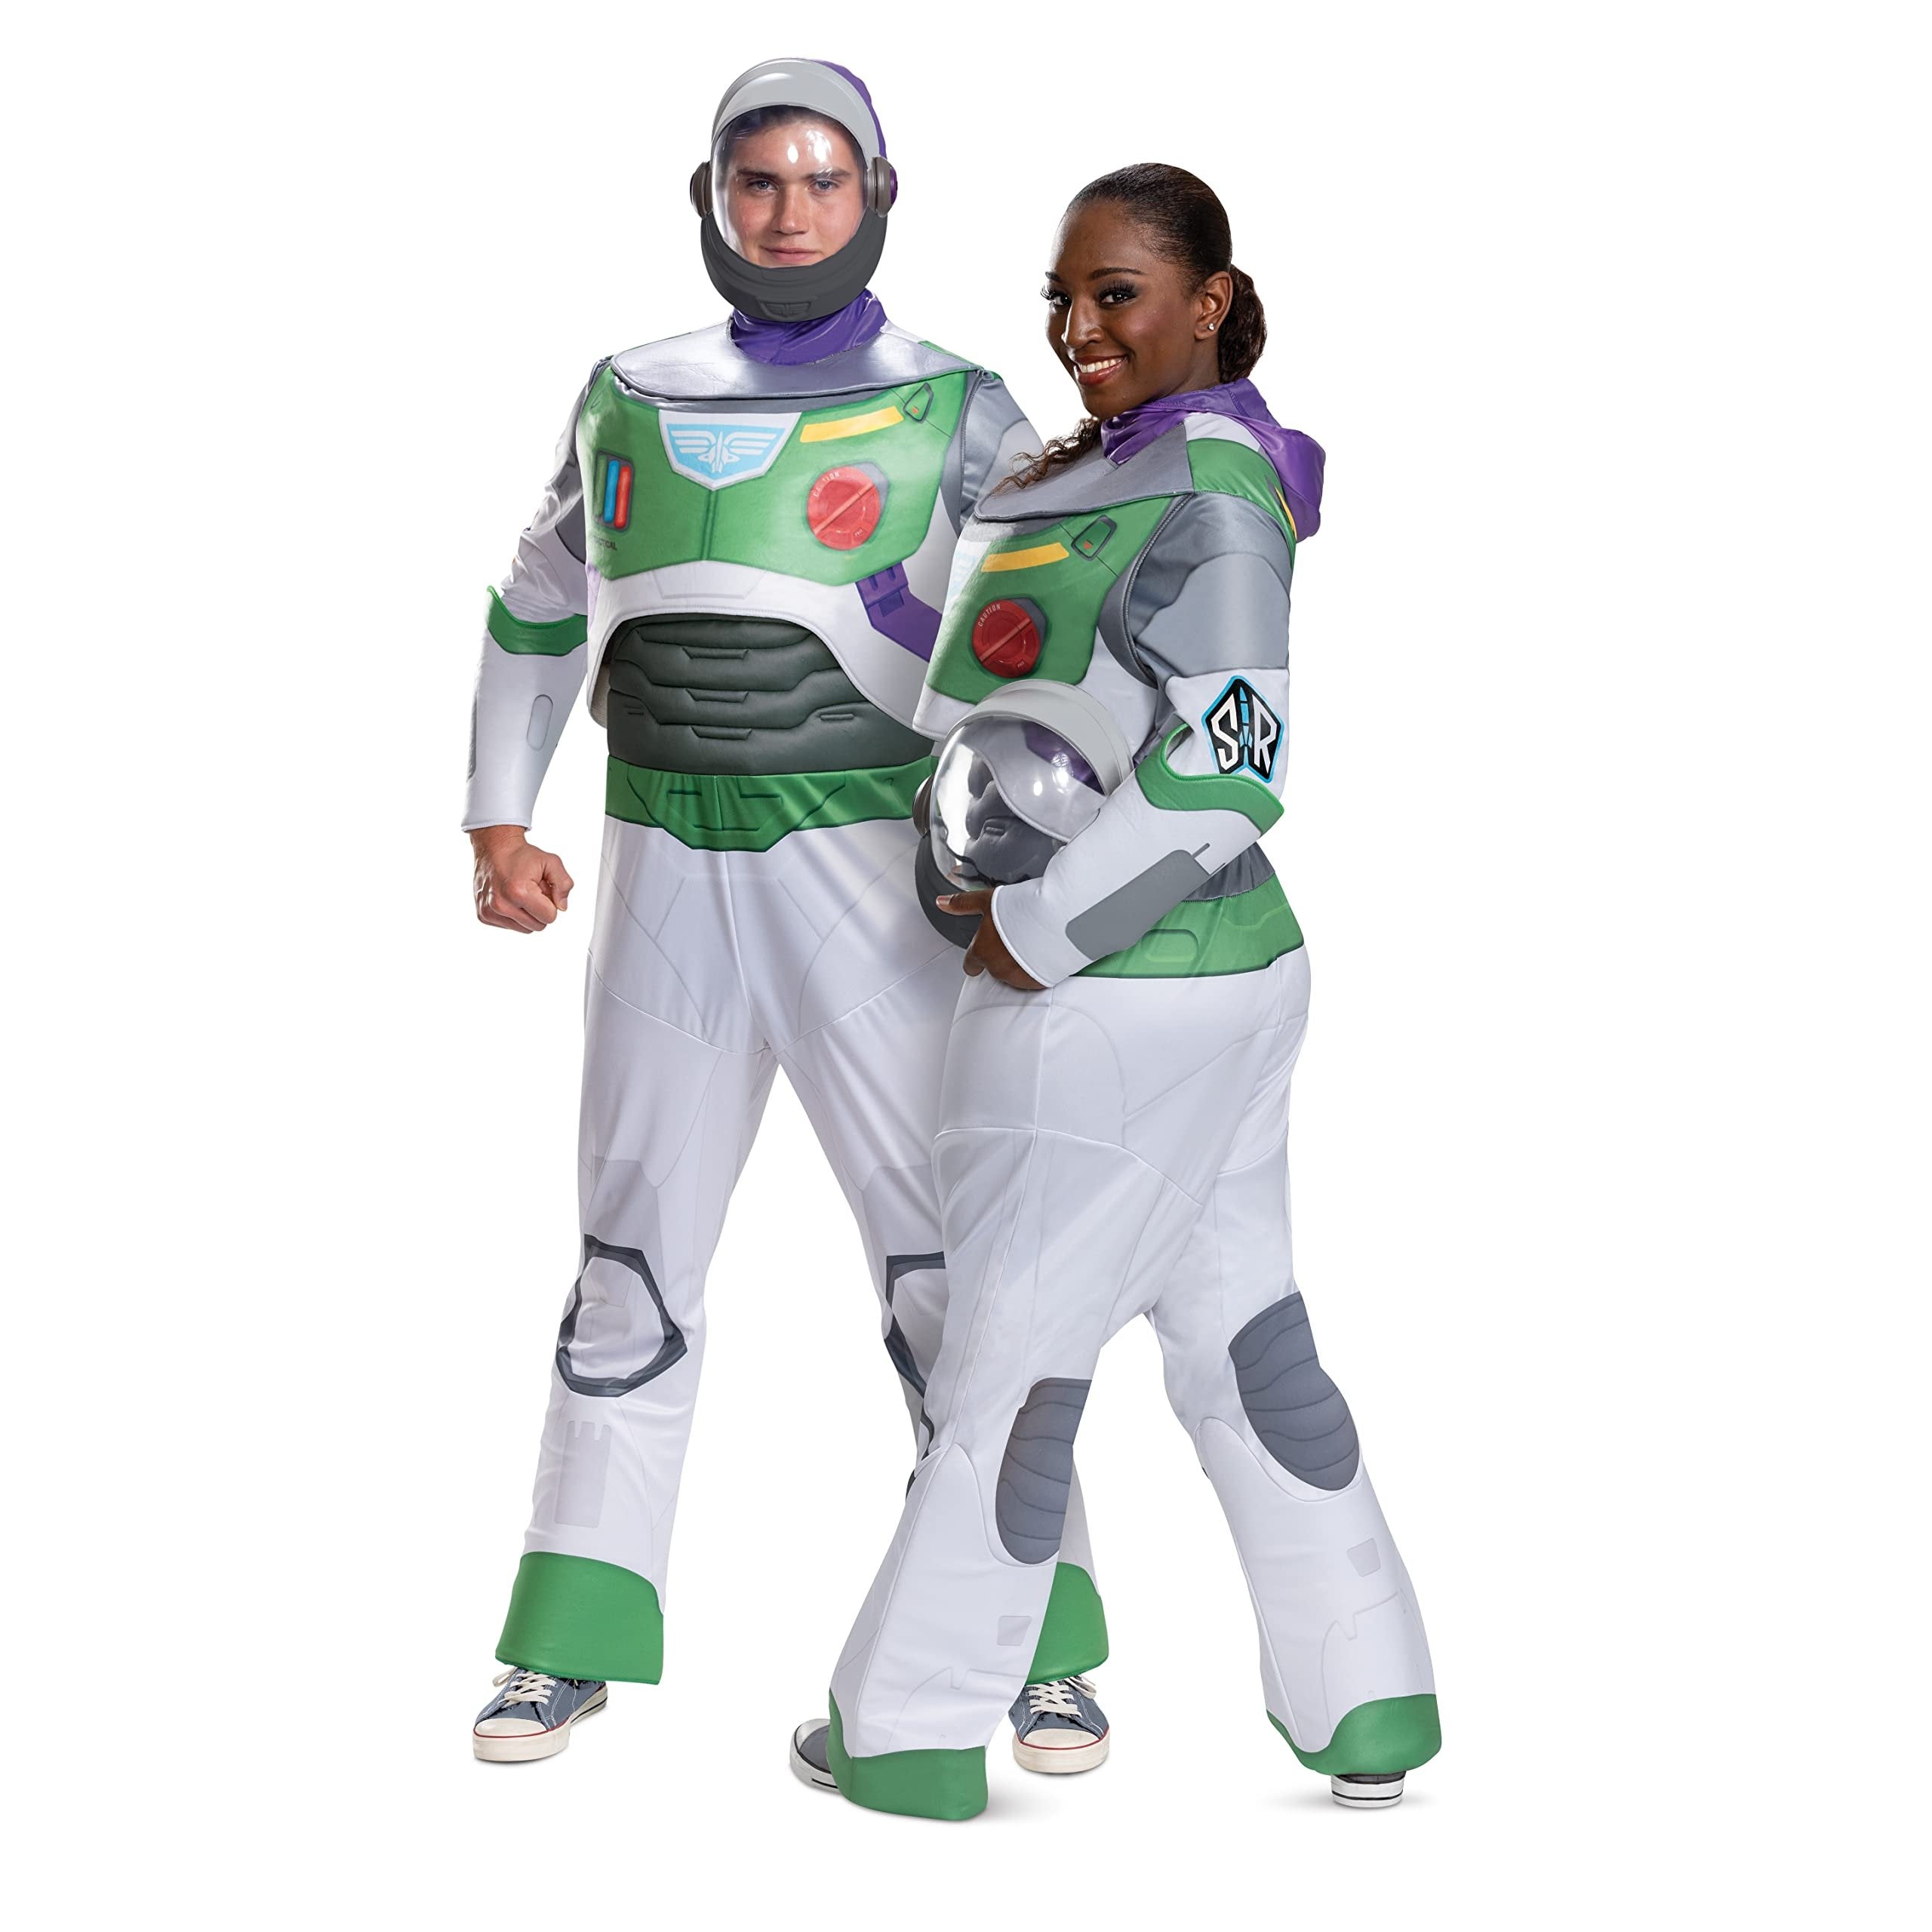 Disguise mens Disney Pixar Lightyear Buzz Space Ranger Costume, Official Disney Lightyear Outfit Adult Sized Costumes, As Shown, Men s Size Medium 38-40 US